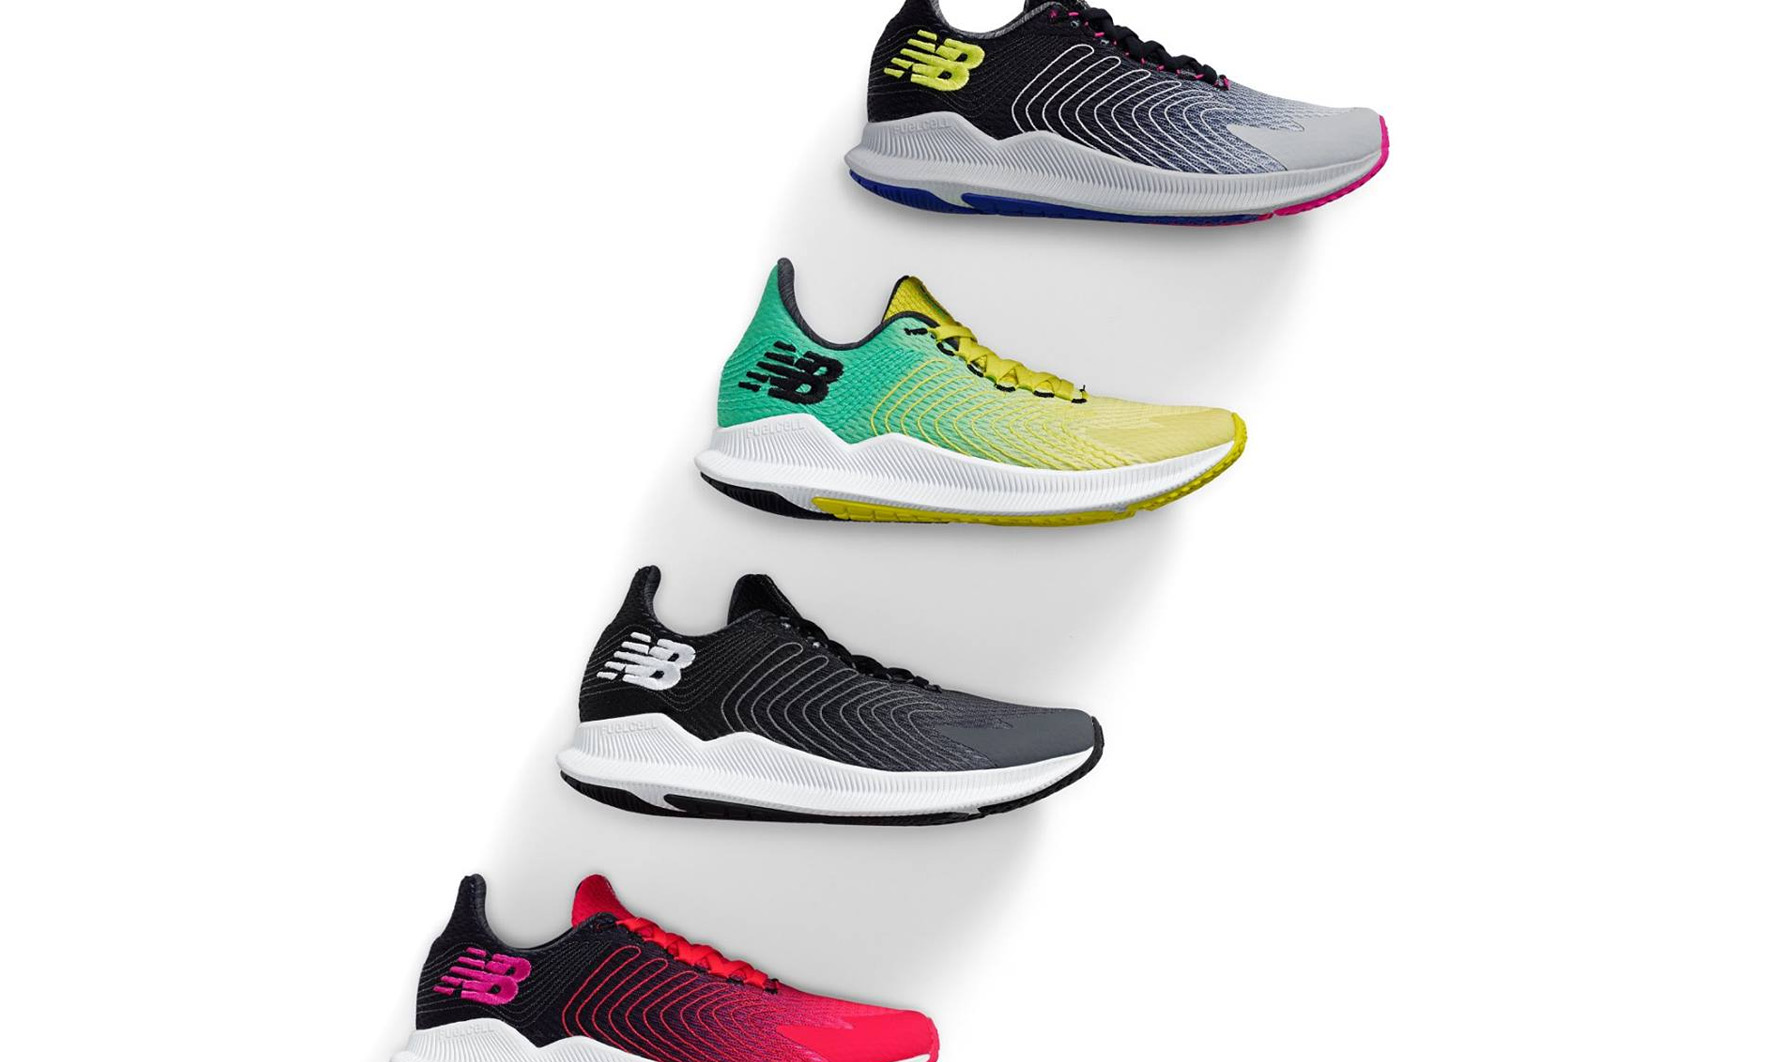 new balance running shoes prices